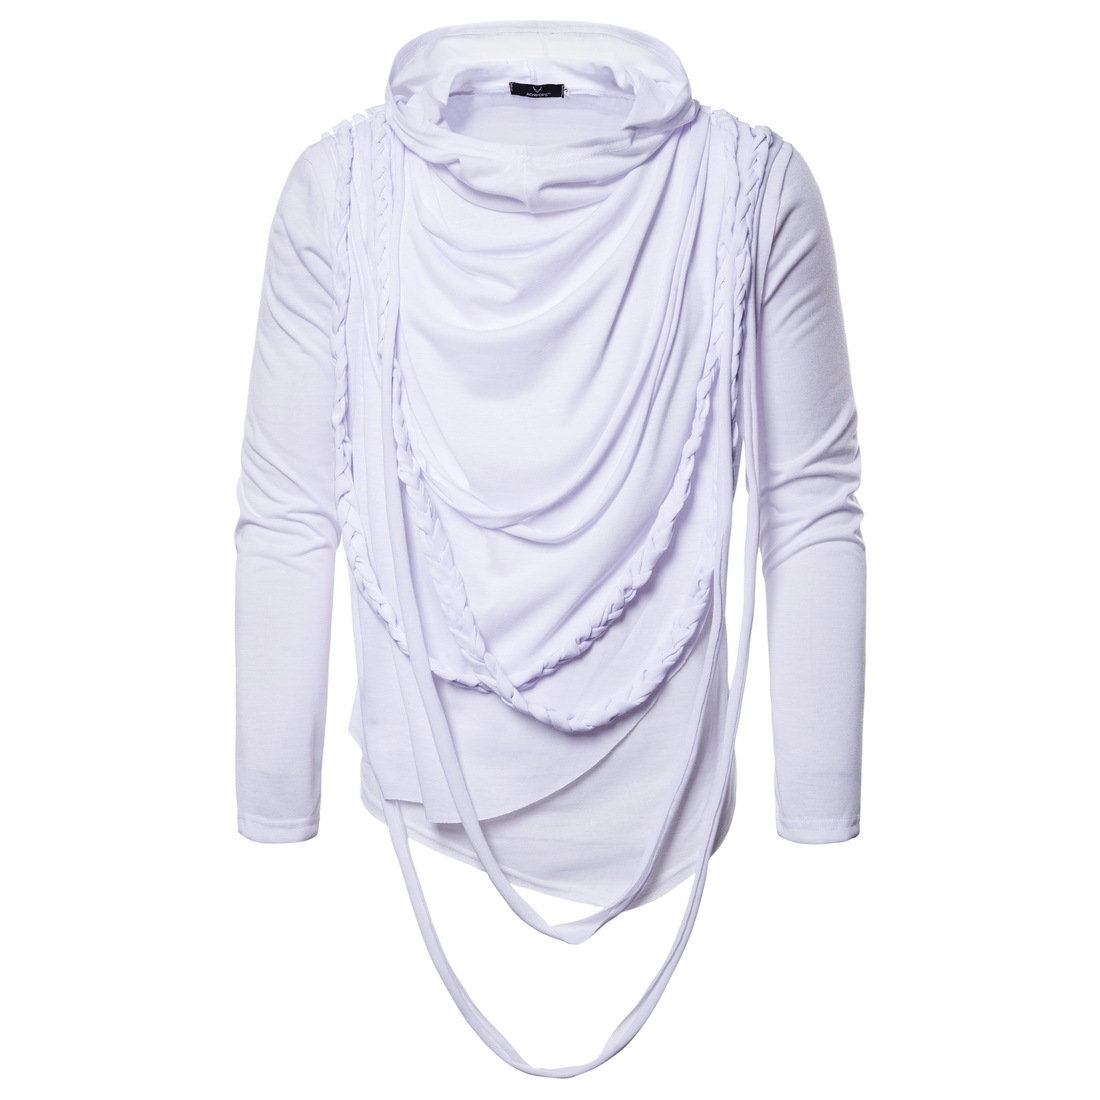  New Fashion Spring Autumn Winter Clothing Trend Long-sleeved Pullovers Men T Shirt Tops white